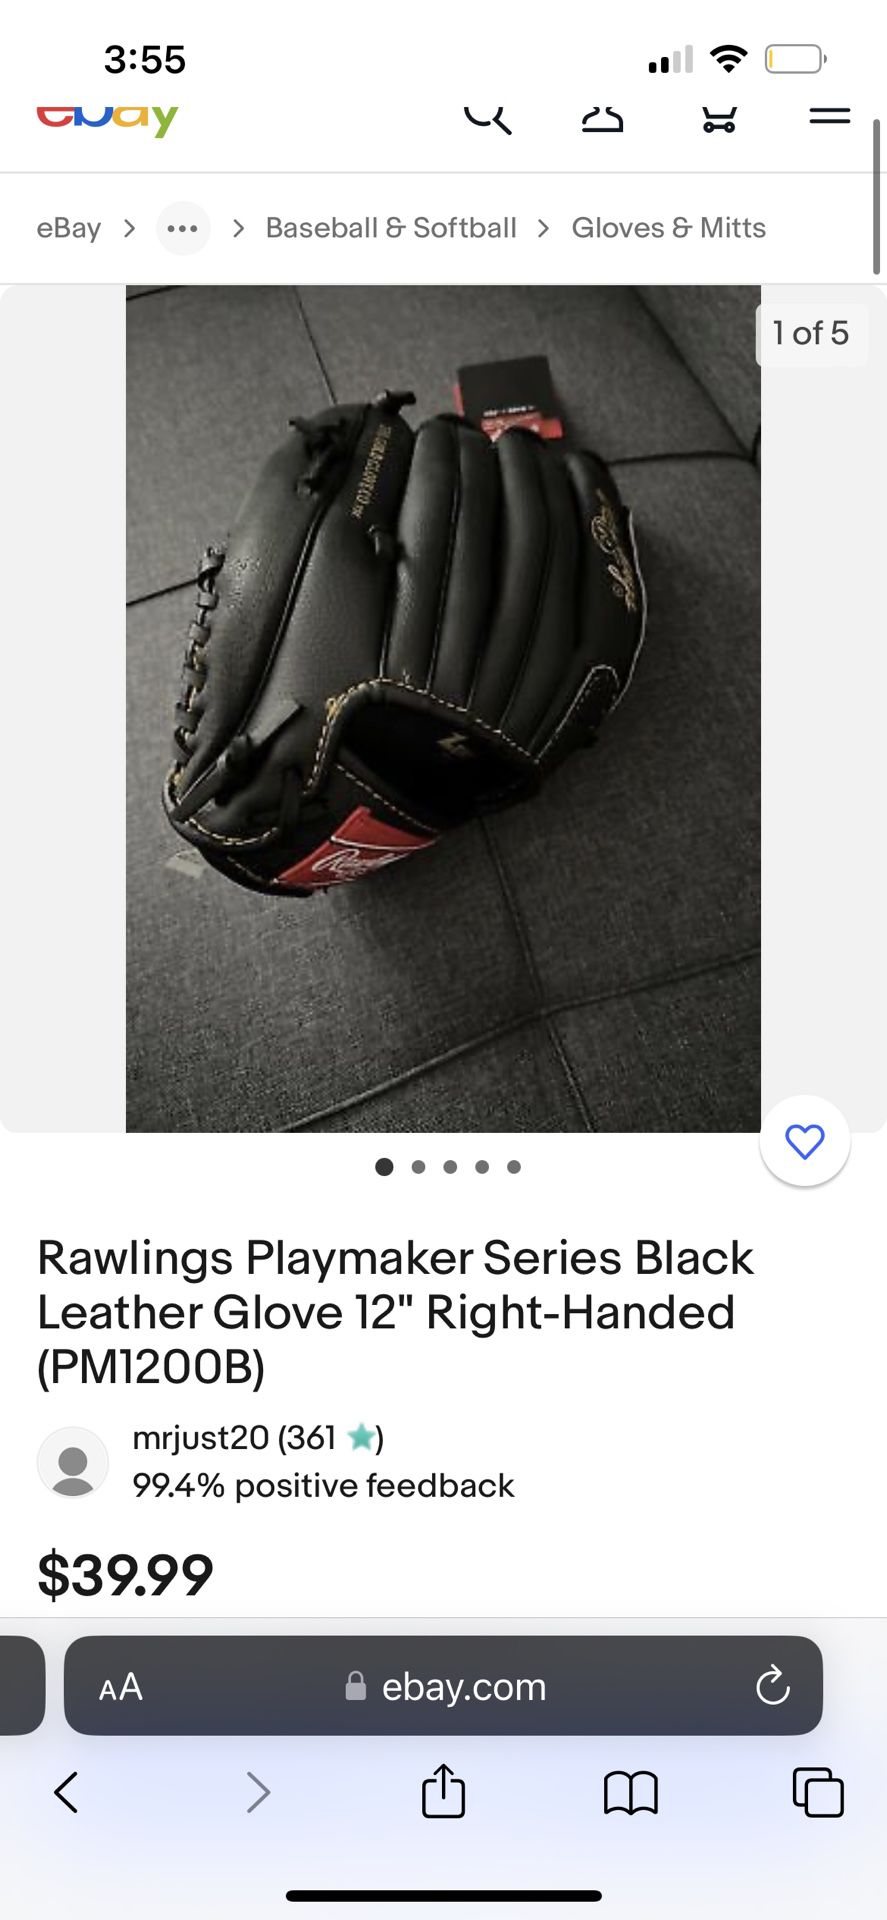 Rawlings Playmaker Series Black Leather Glove 12 1/2 Inch Right-Handed PM125OB